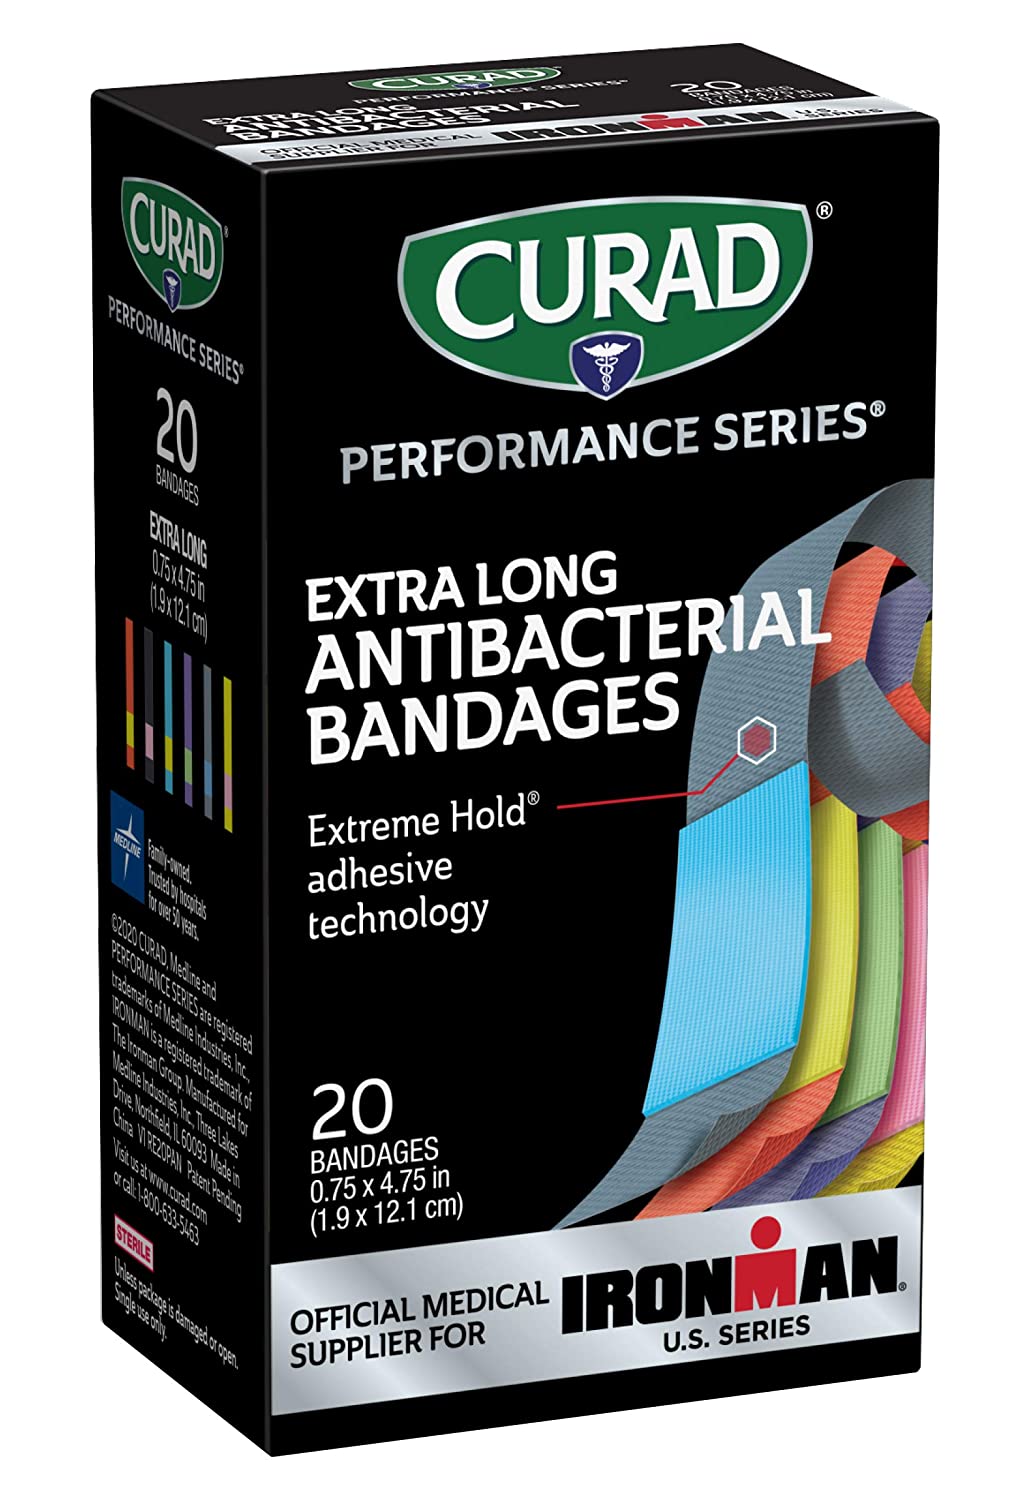 20-Count Curad Performance Series Ironman Extra Long Antibacterial Bandage (Extreme Hold) $3 + Free S&H w/ Prime or $25+